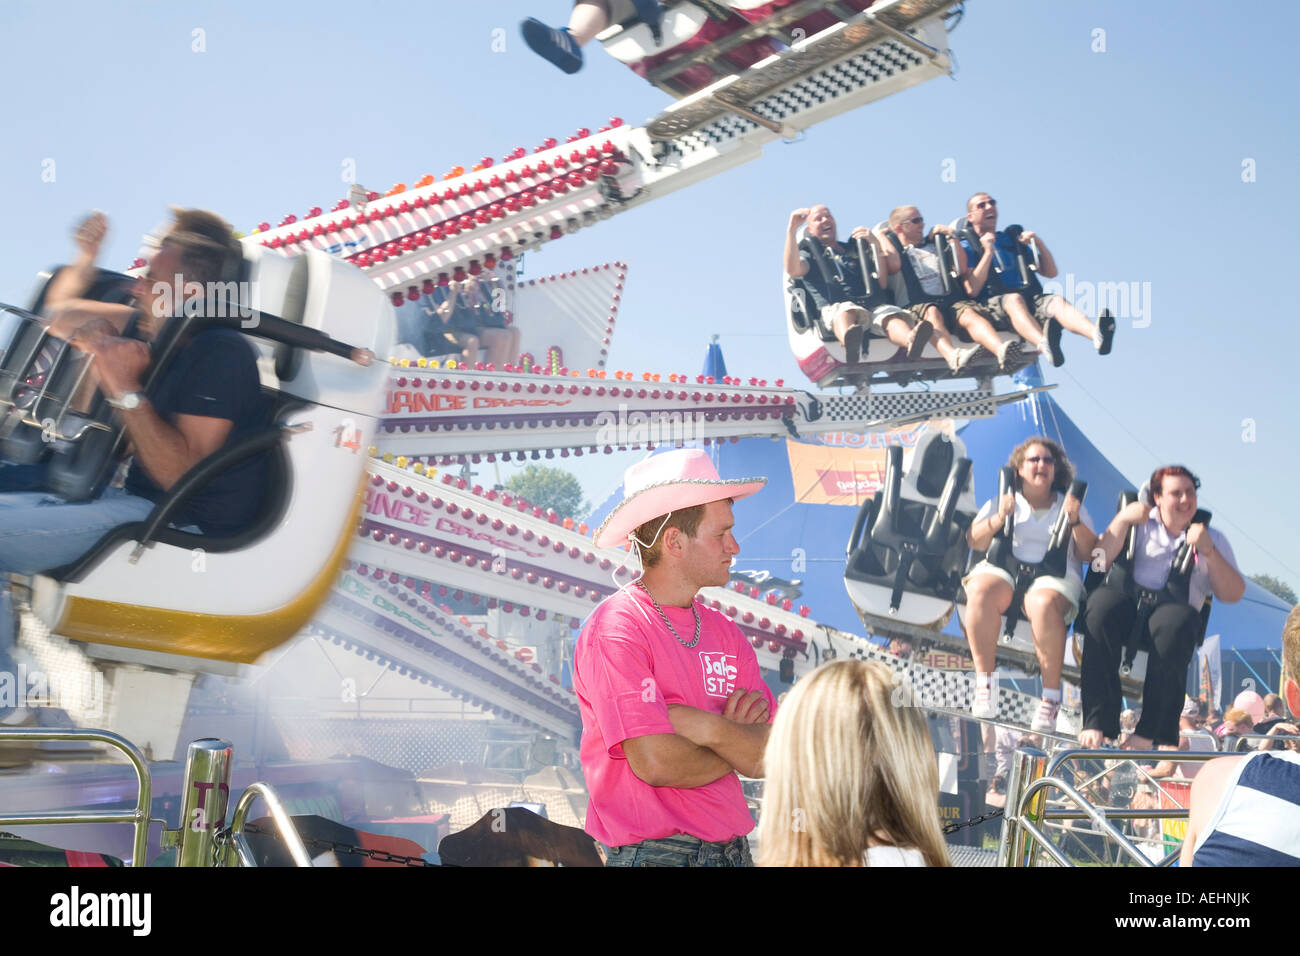 Gay Pride festival Brighton. Man in pink stetson hat stands in front of a fun fair ride showing people enjoying themselves. Stock Photo